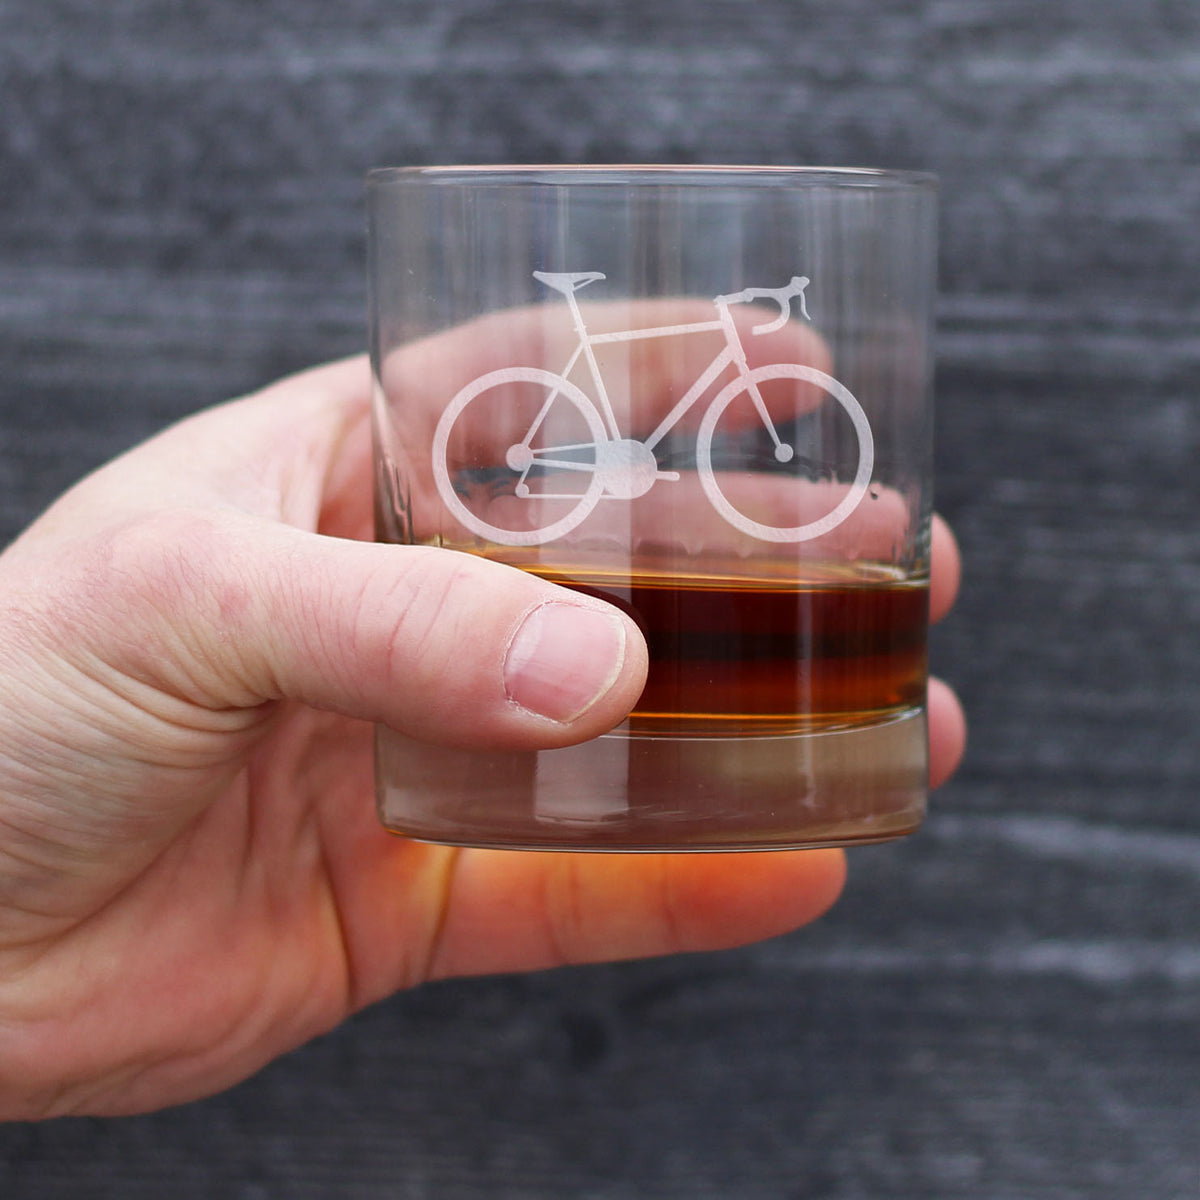 Bicycle - Whiskey Rocks Glass - Unique Road Biking Themed Decor and Gifts for Cyclists - 10.25 Oz Glasses